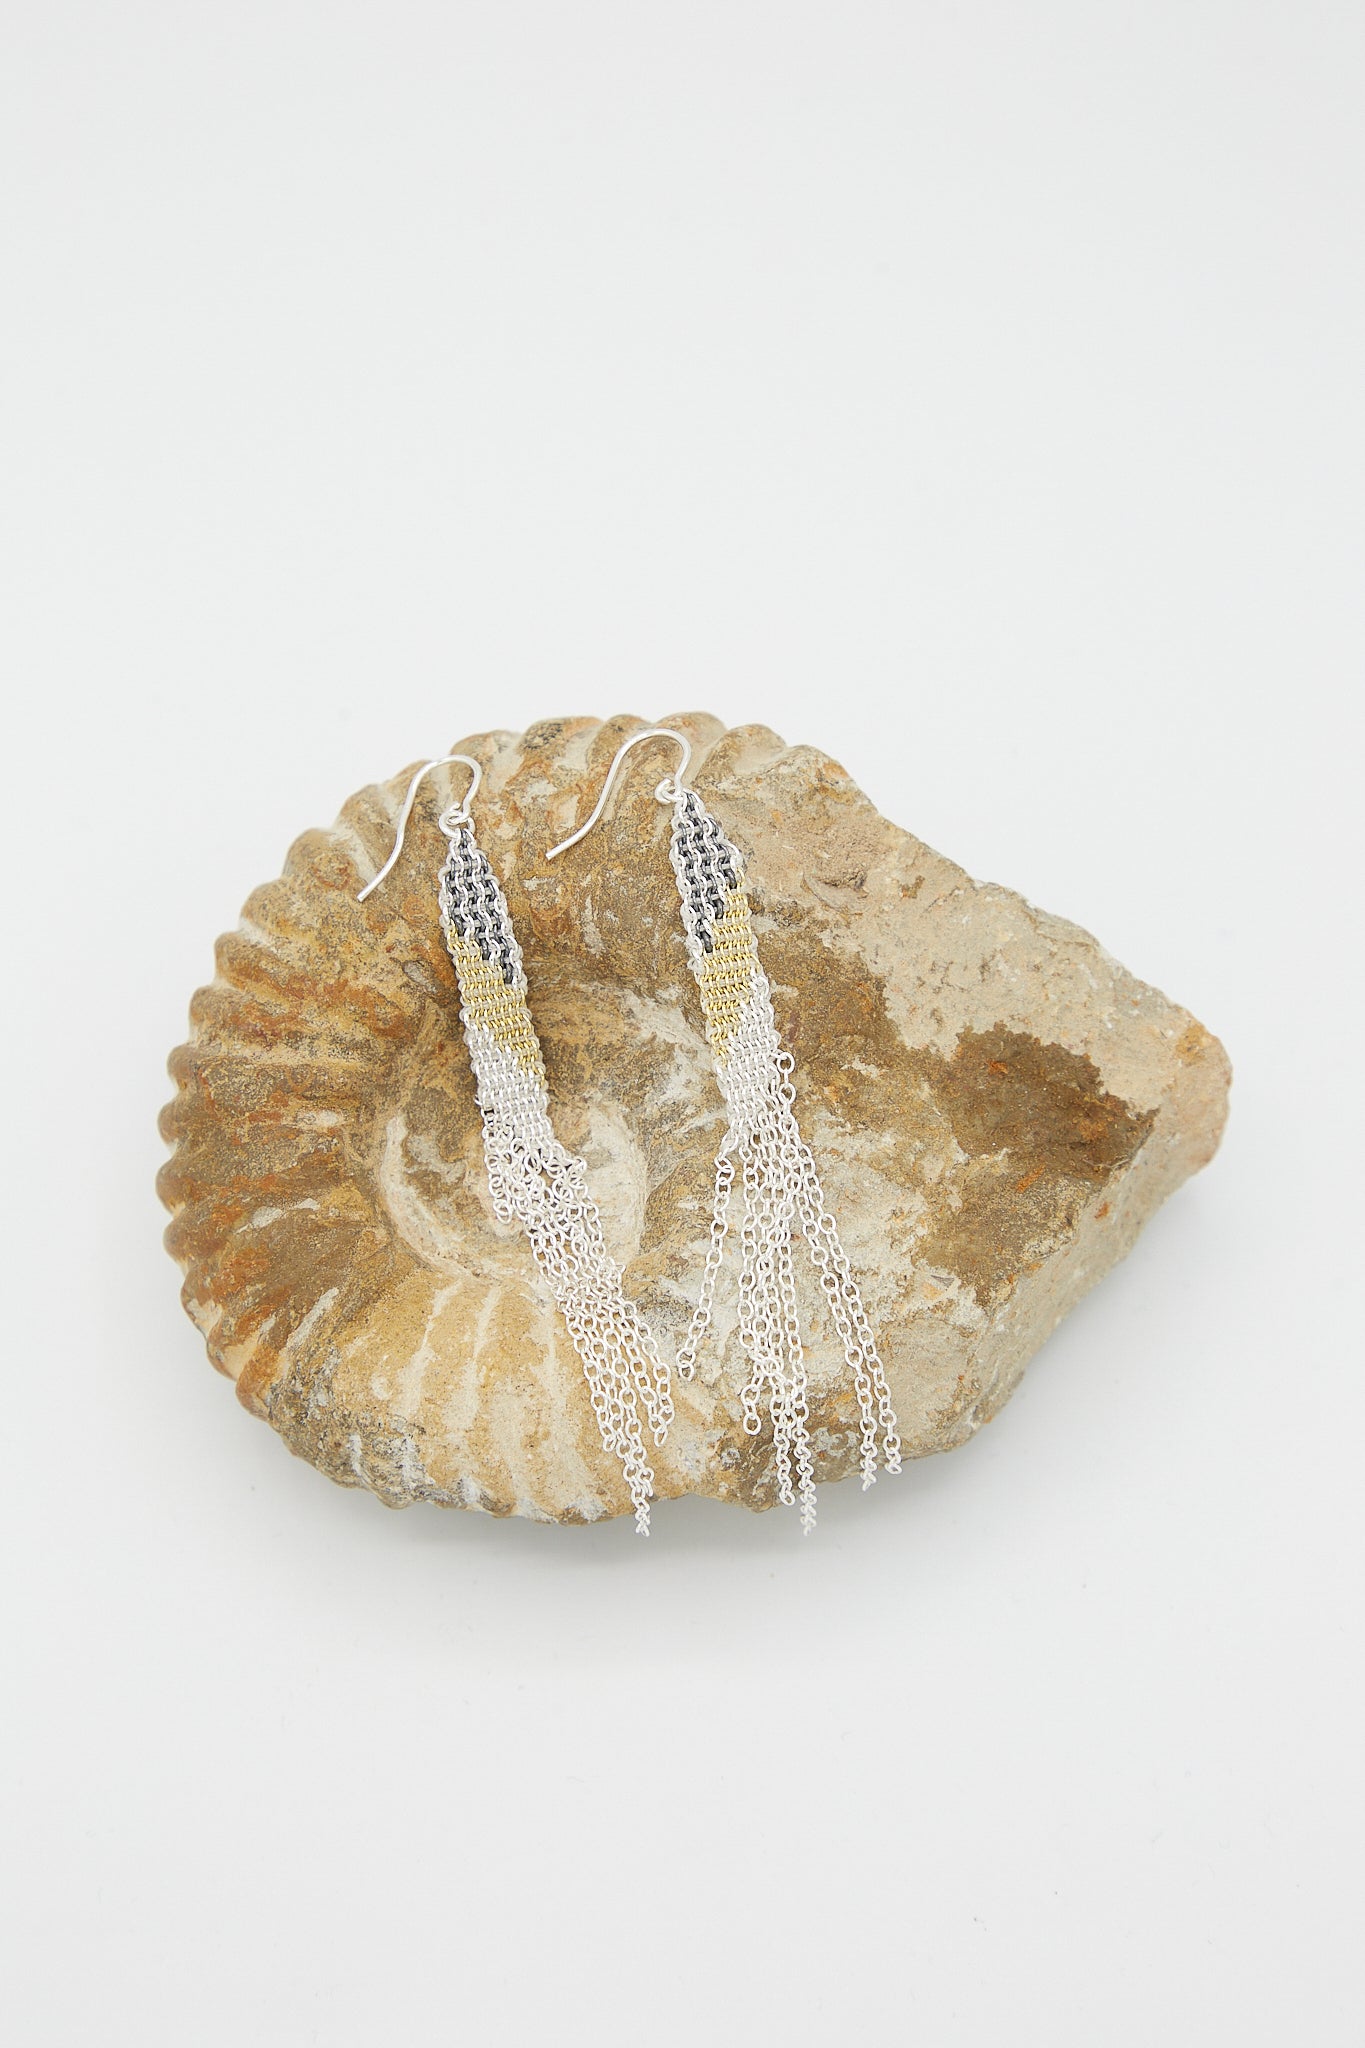 A pair of Stephanie Schneider sterling silver earrings in silver oxidized and gold-plated silk with tassels on a shell.